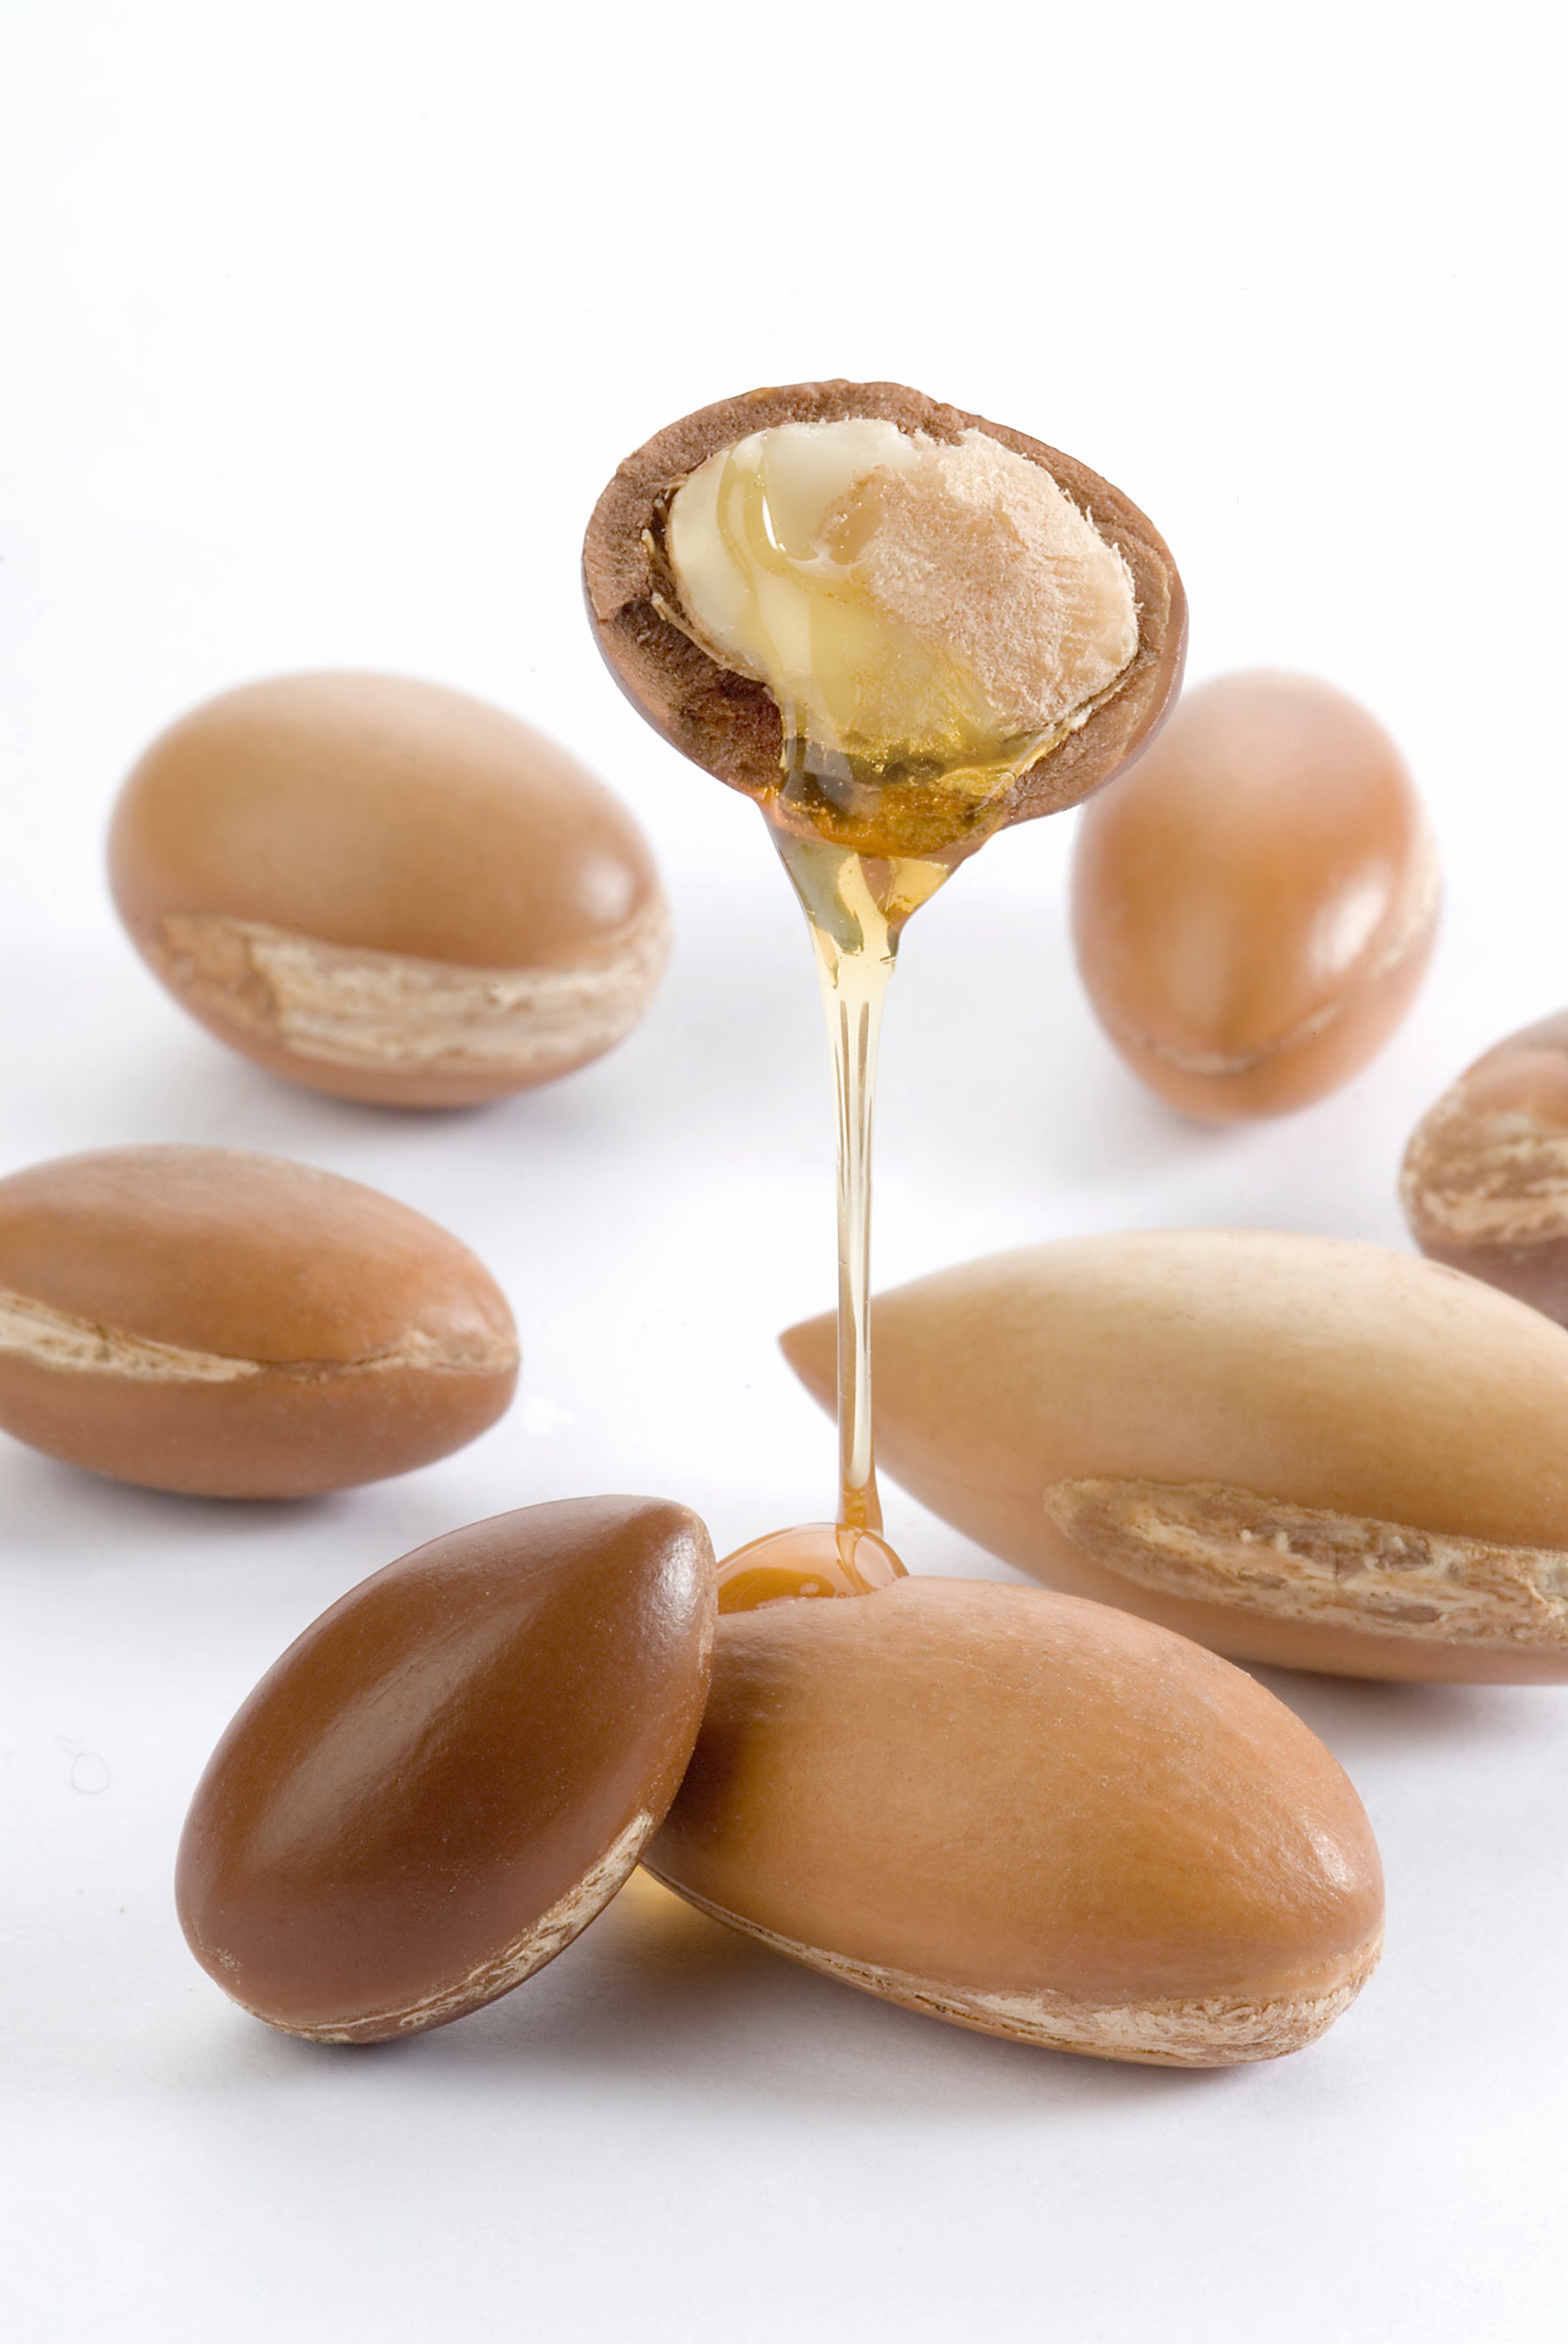 MOROCCAN ARGAN OIL BENEFITS FOR HAIR AND SKIN